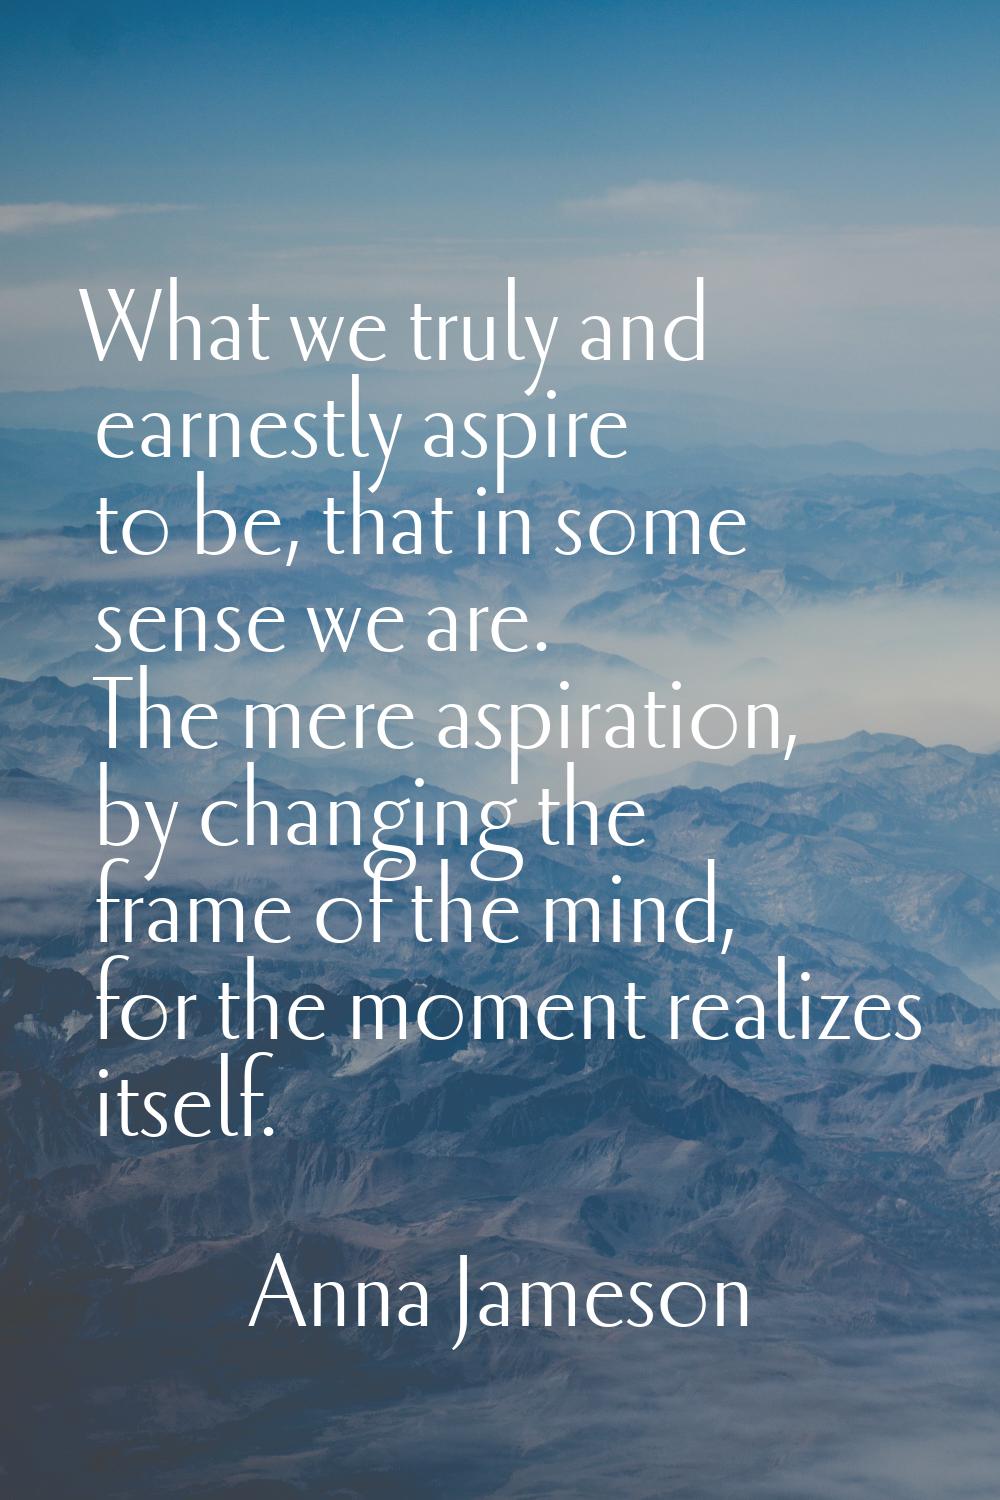 What we truly and earnestly aspire to be, that in some sense we are. The mere aspiration, by changi